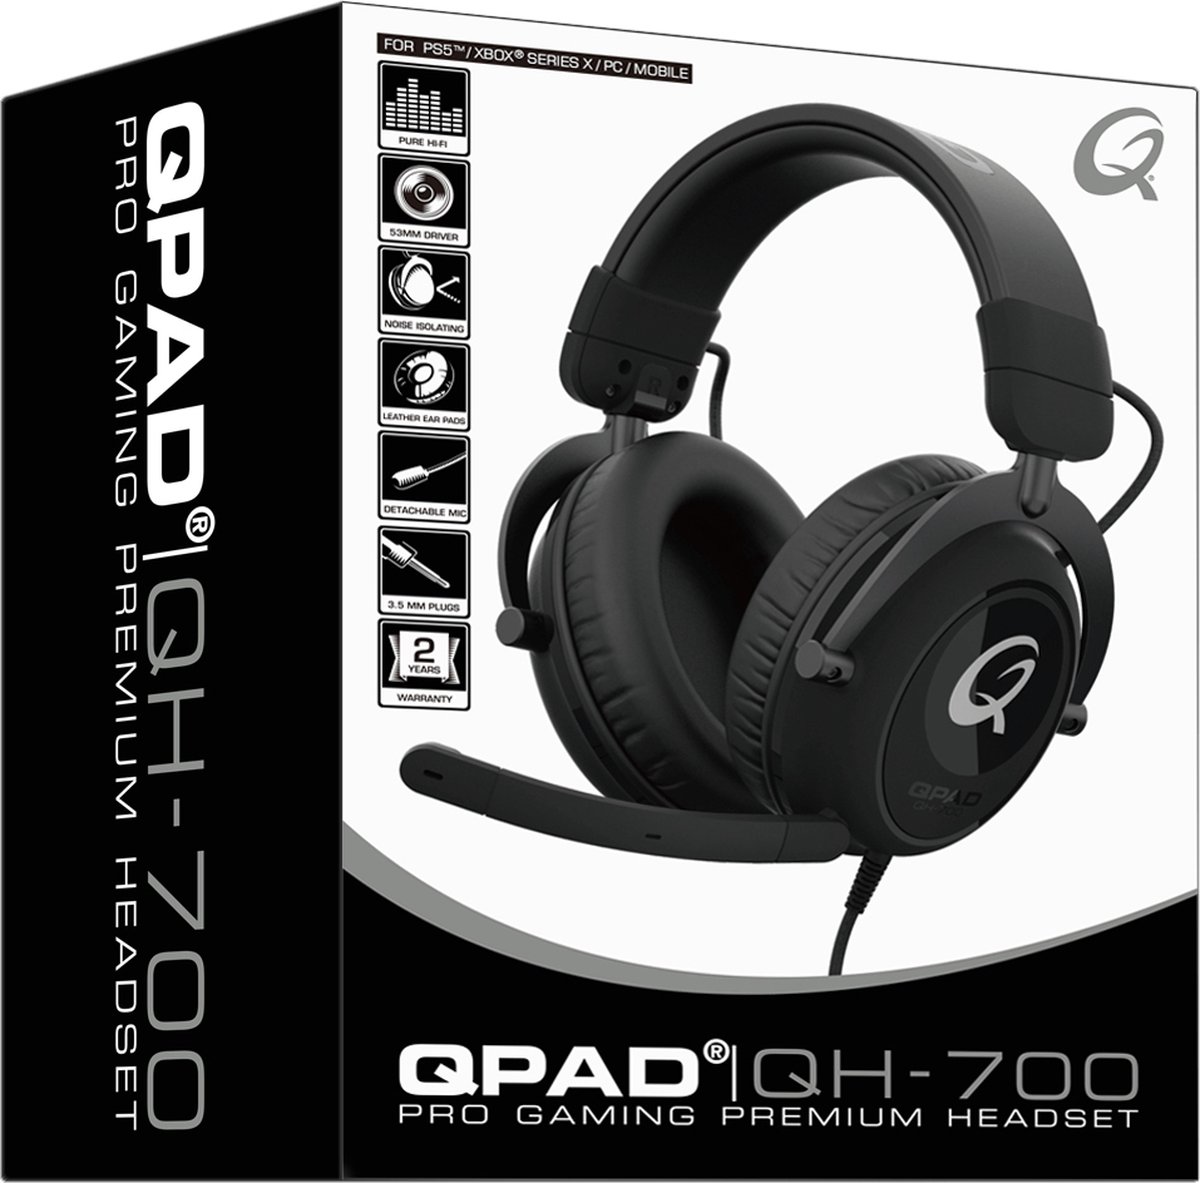 QPAD - QH-700 - Bedrade stereo gaming headset Zwart voor PC, PS4/PS5, Xbox One, Xbox Series S|X, Nintendo Switch